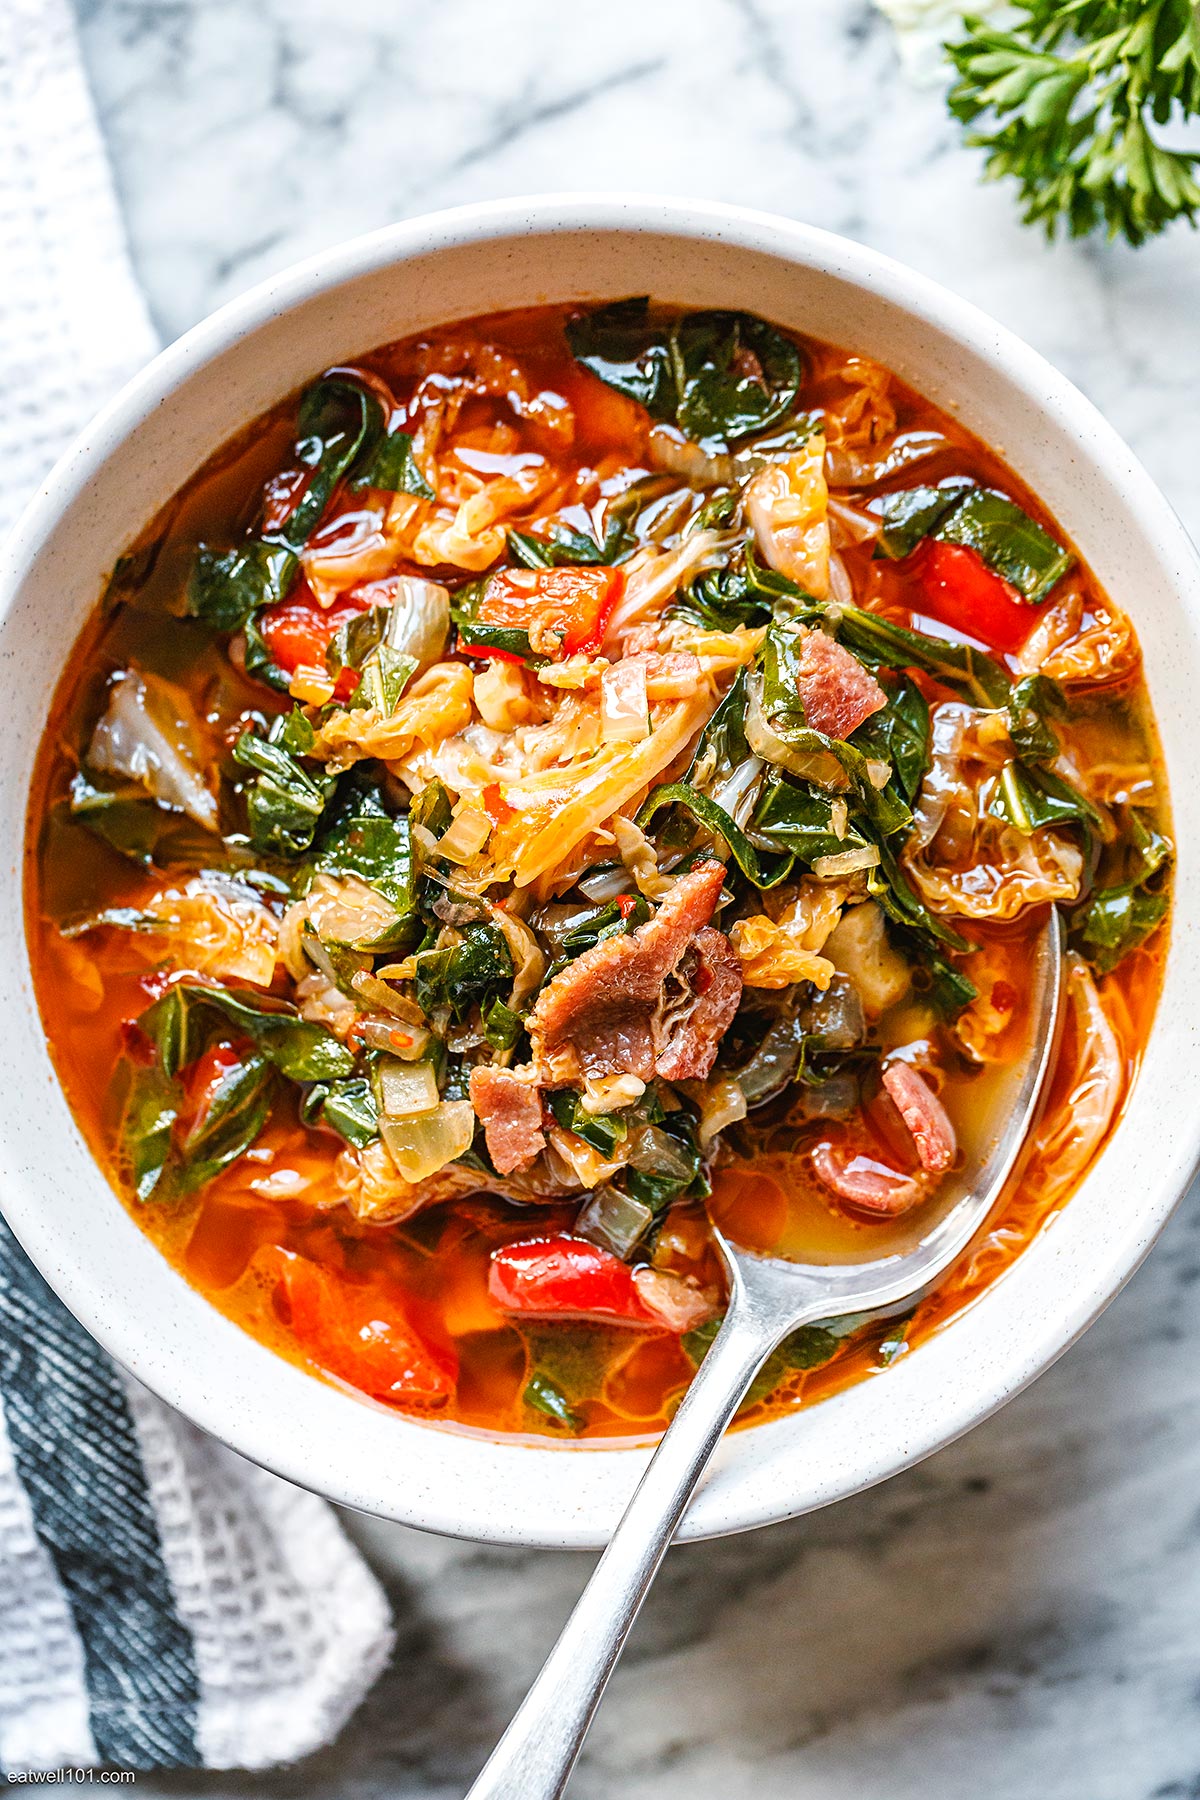 Collard Greens Cabbage Soup - #recipe by #eatwell101 - https://www.eatwell101.com/collard-greens-cabbage-soup-recipe